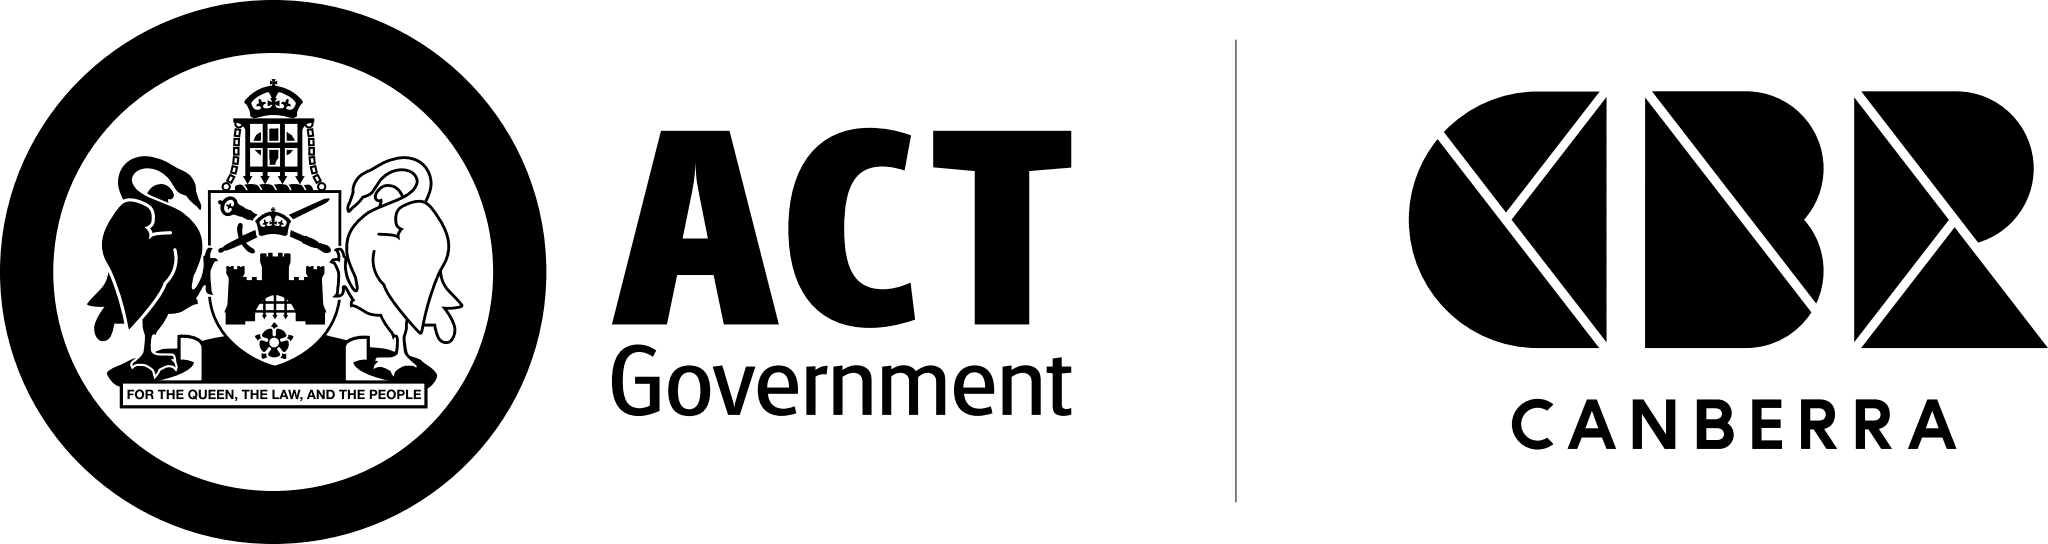 ACT Government | CBR